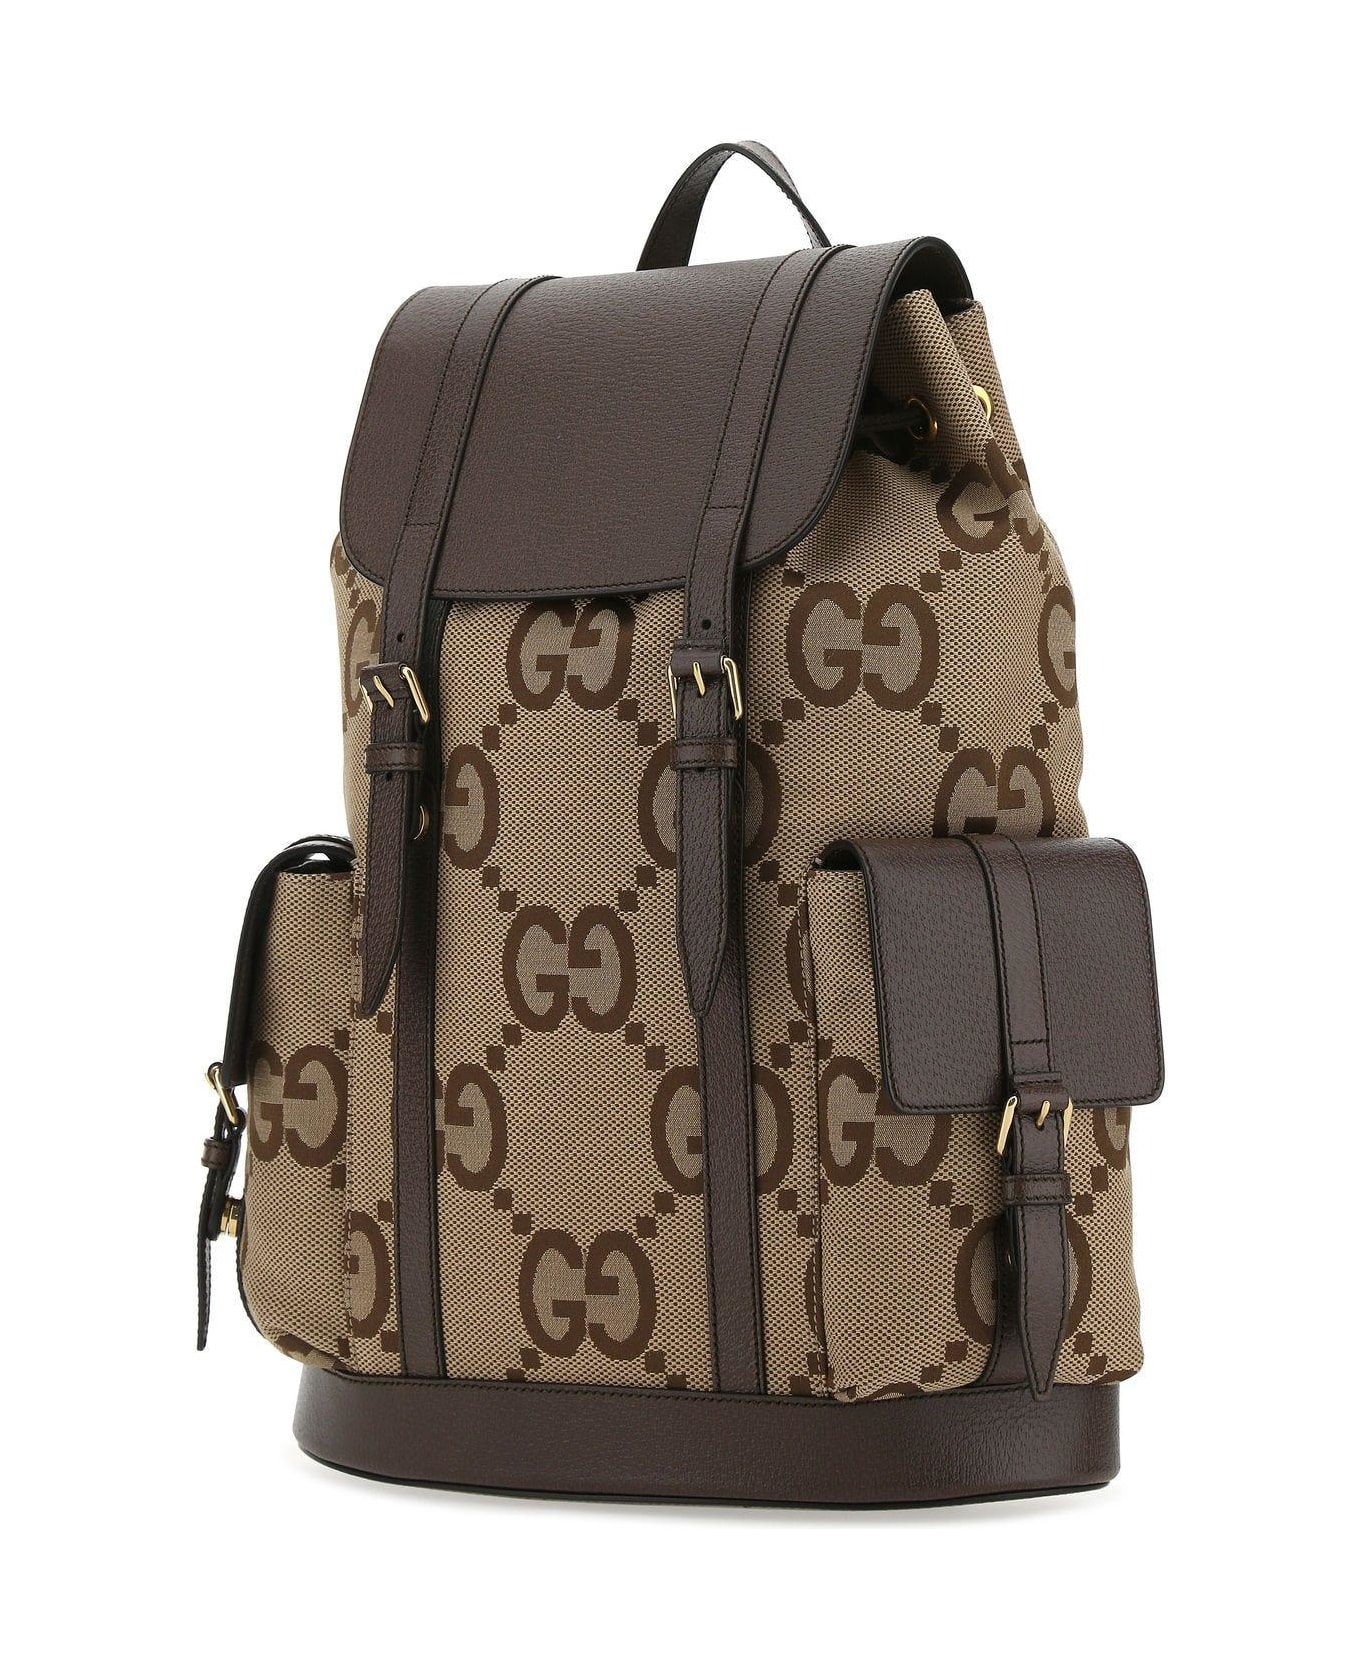 Gucci Multicolor Jumbo Gg Fabric And Leather Backpack - Beige